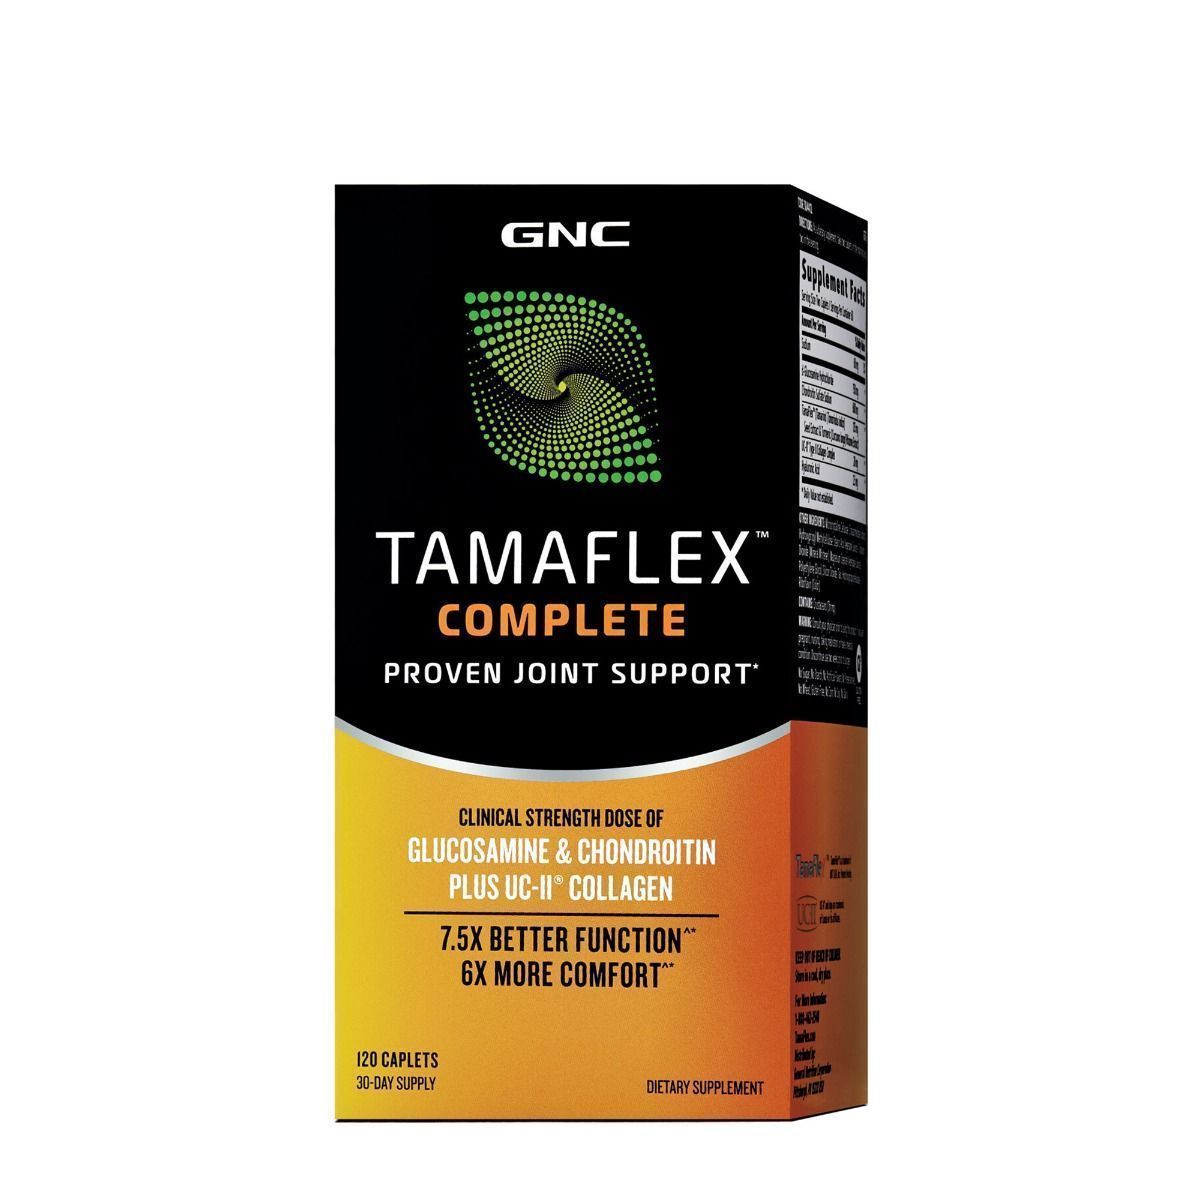 GNC TamaFlex Complete Proven Joint Support - 7.5X Better Joint Functions & 6X More Comfort